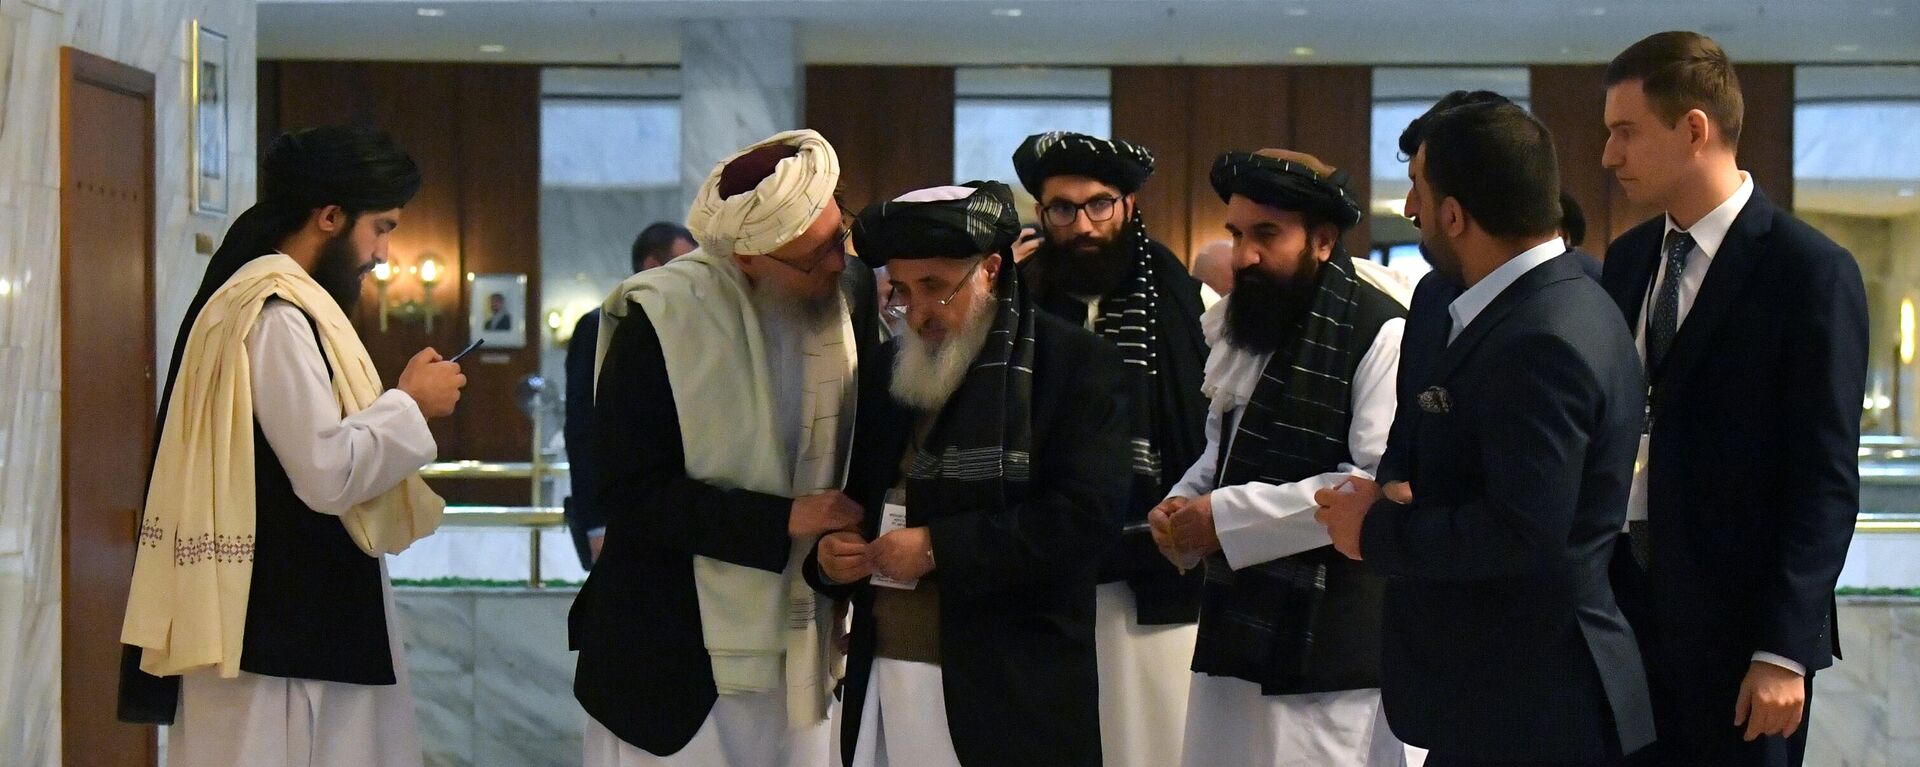 Representatives of the Taliban movement after the third meeting of the Moscow format of consultations on Afghanistan (File) - Sputnik International, 1920, 23.12.2021